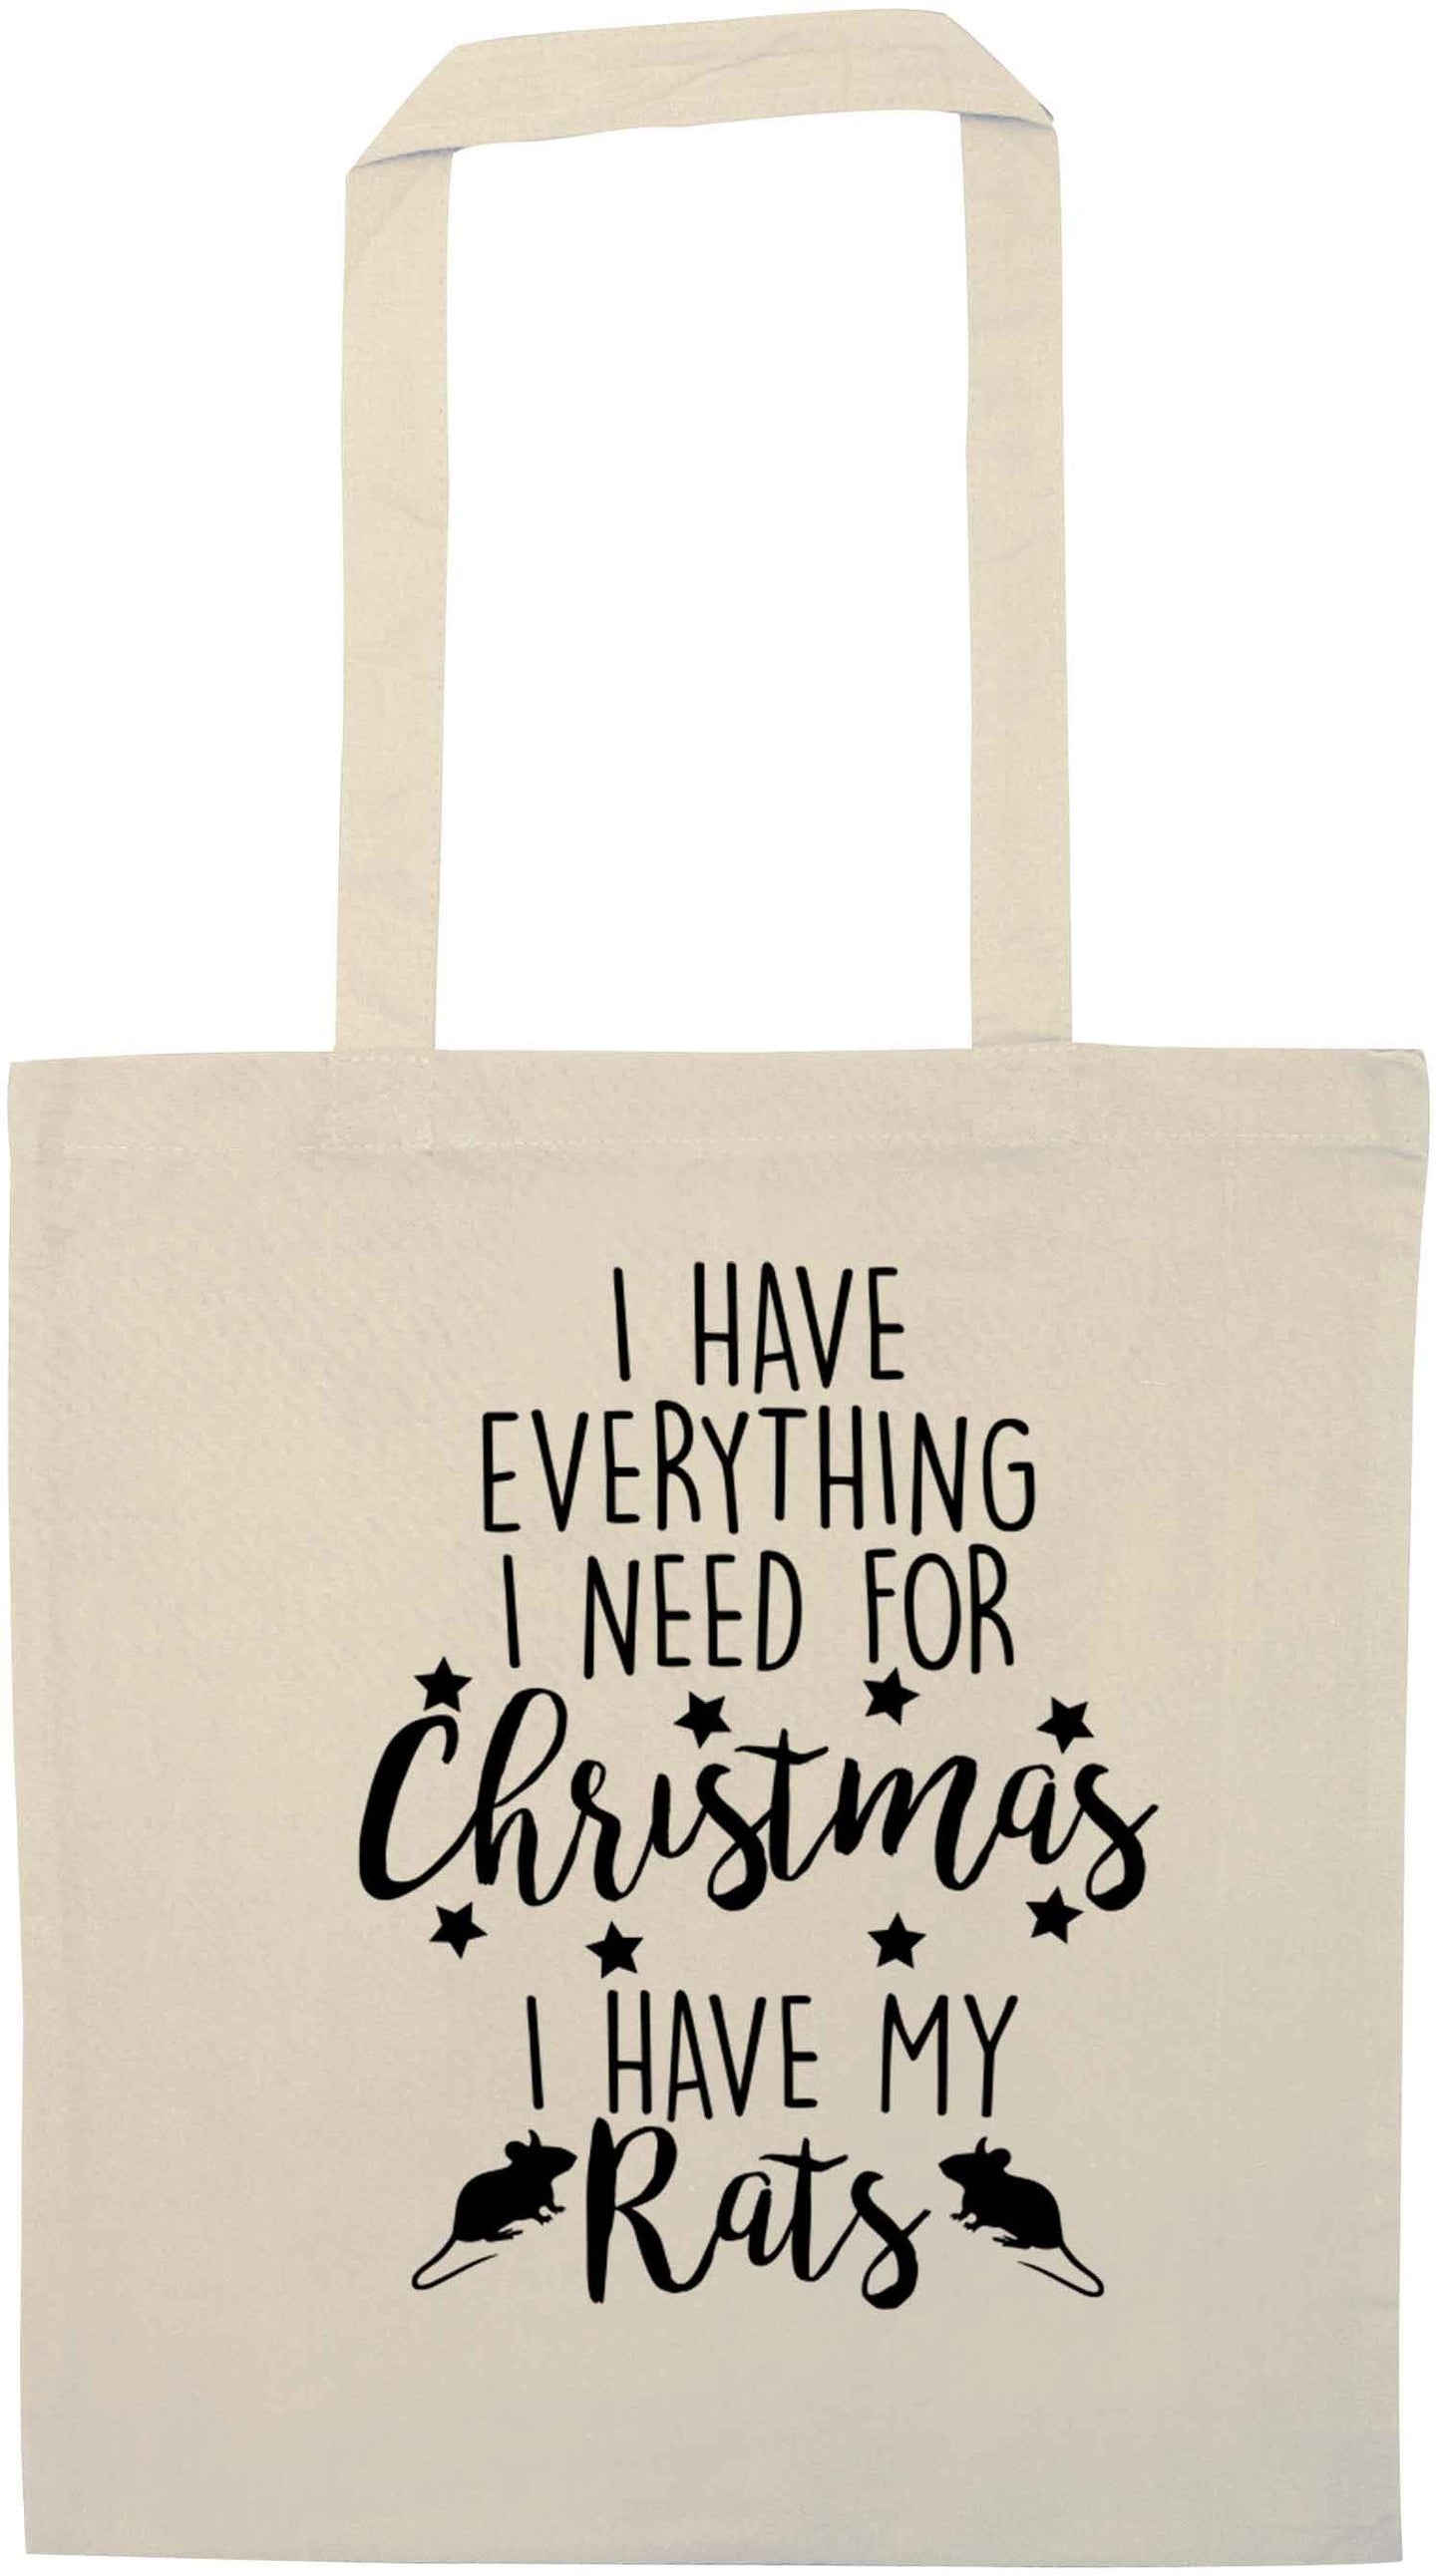 I have everything I need for Christmas I have my rats natural tote bag